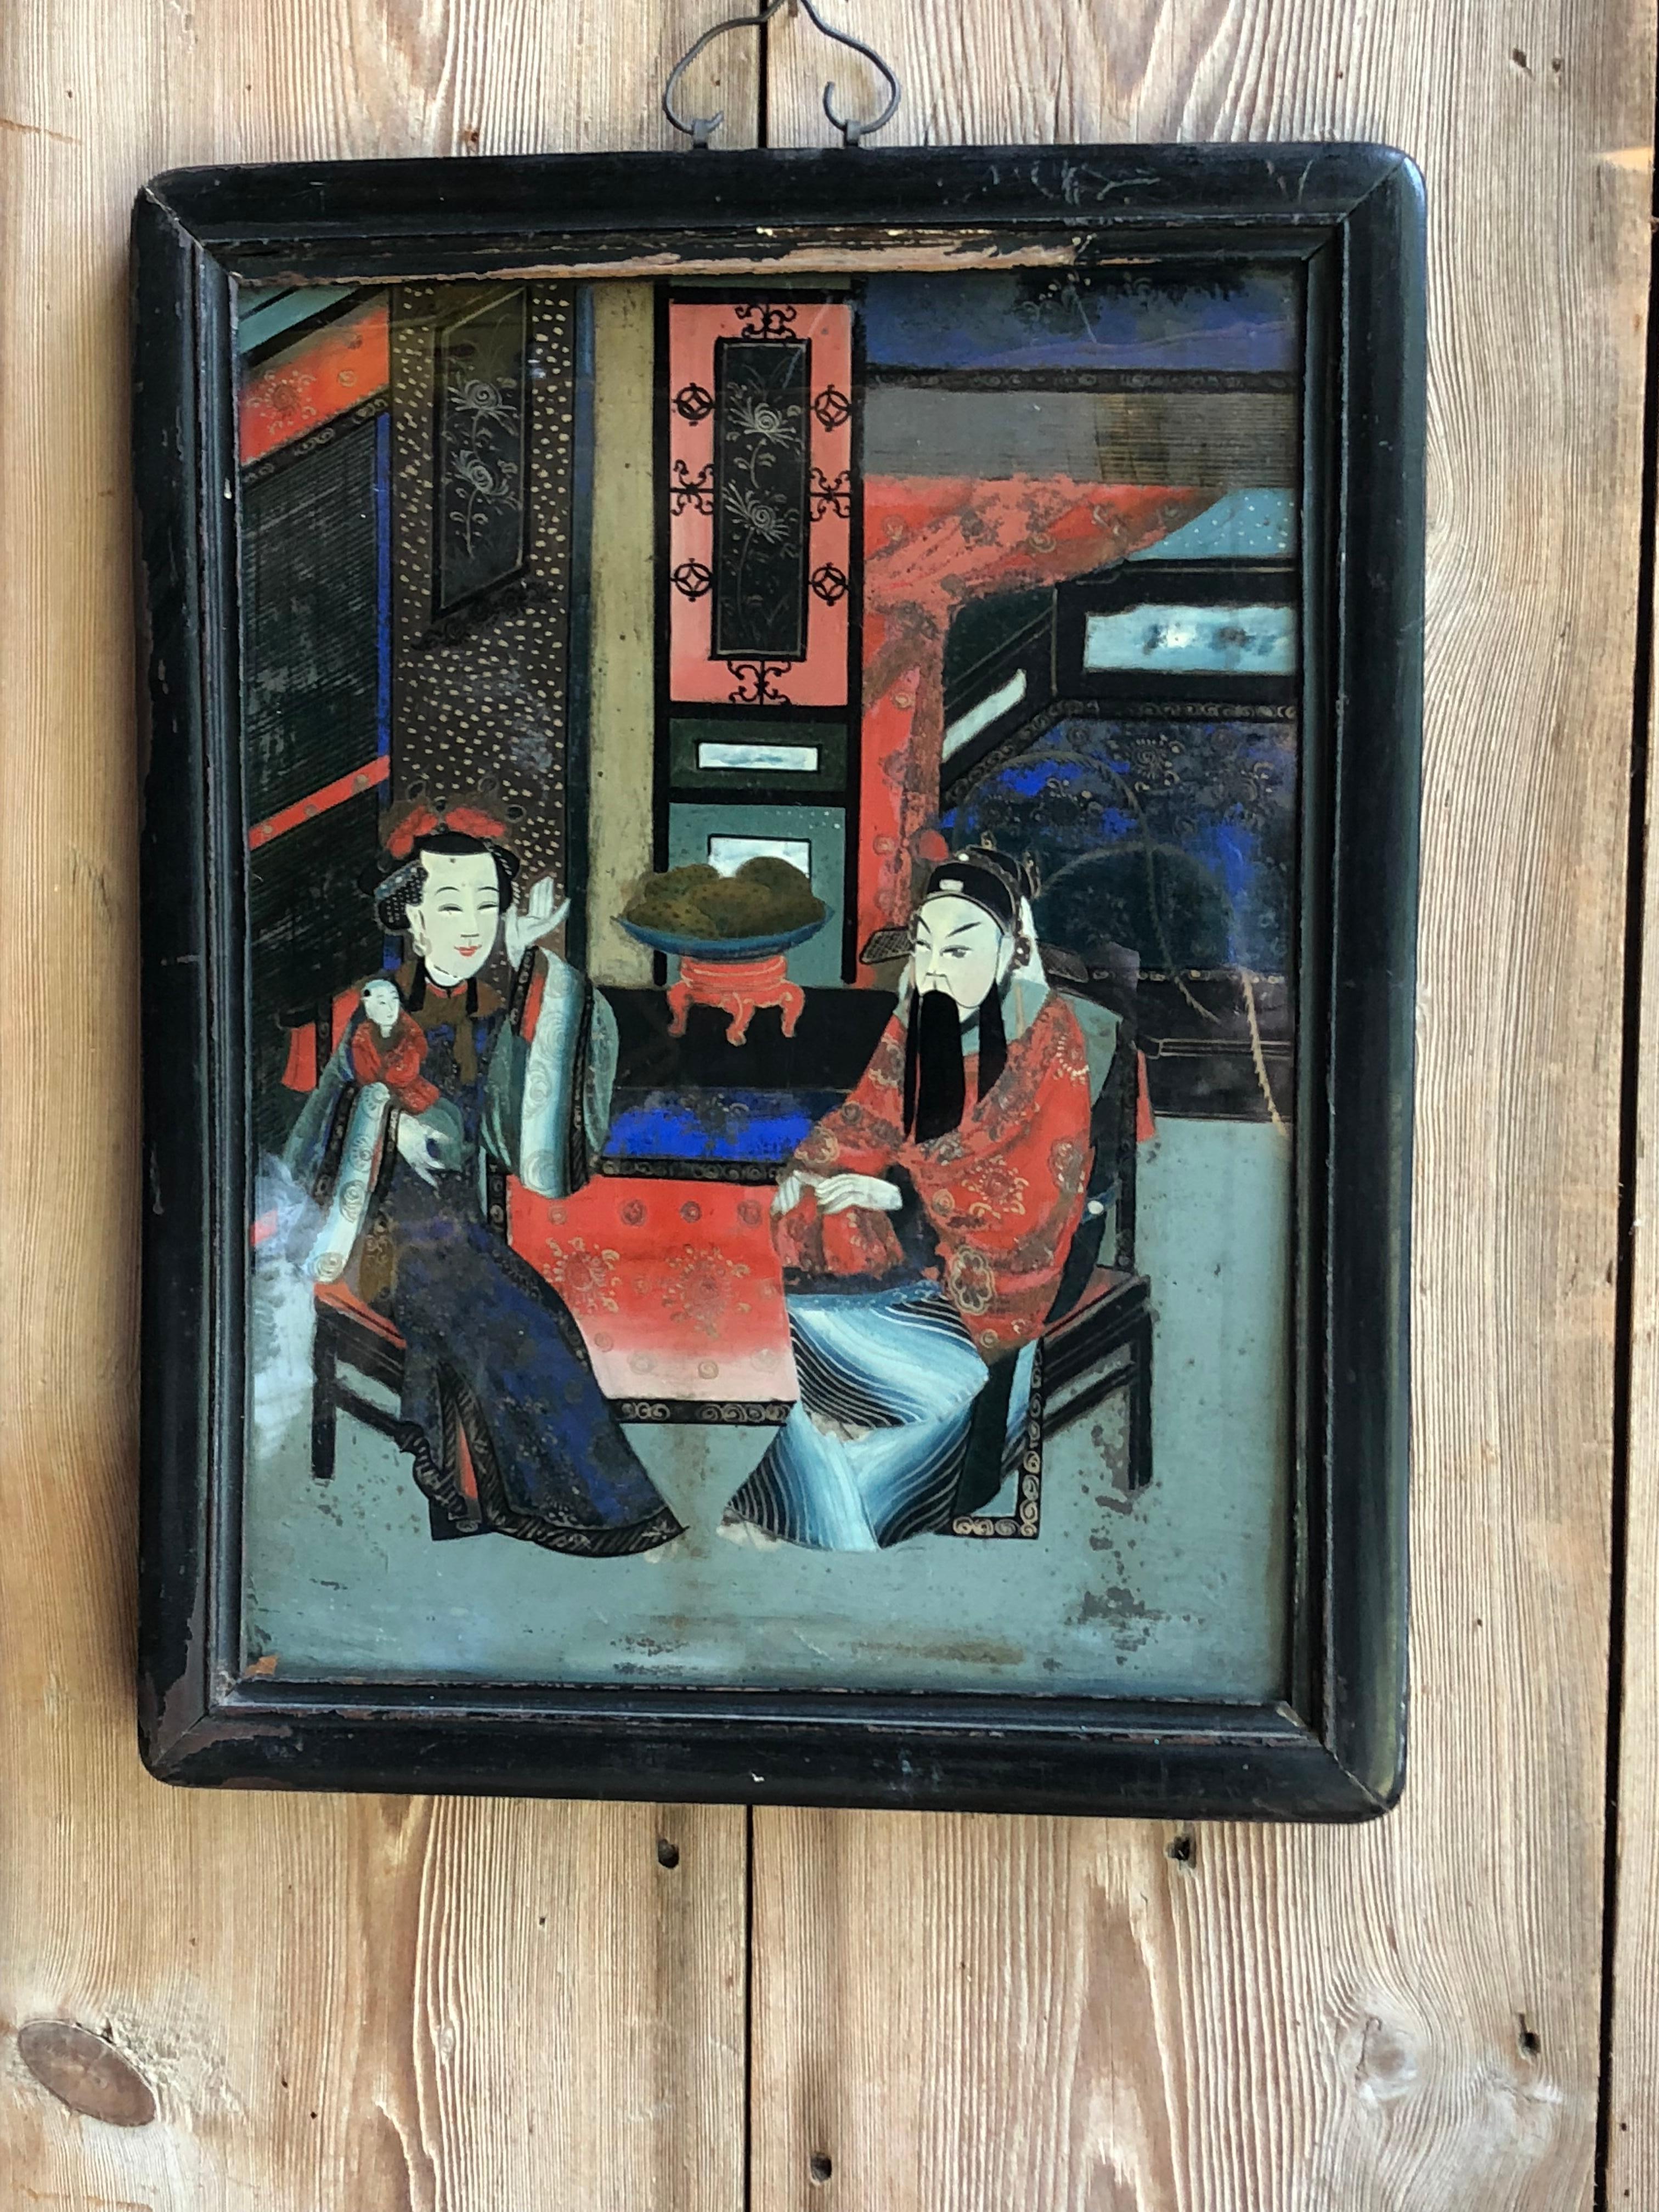 An early 19th century Chinese reverse painting on glass of a couple with a small child in a room, in original teak frame.